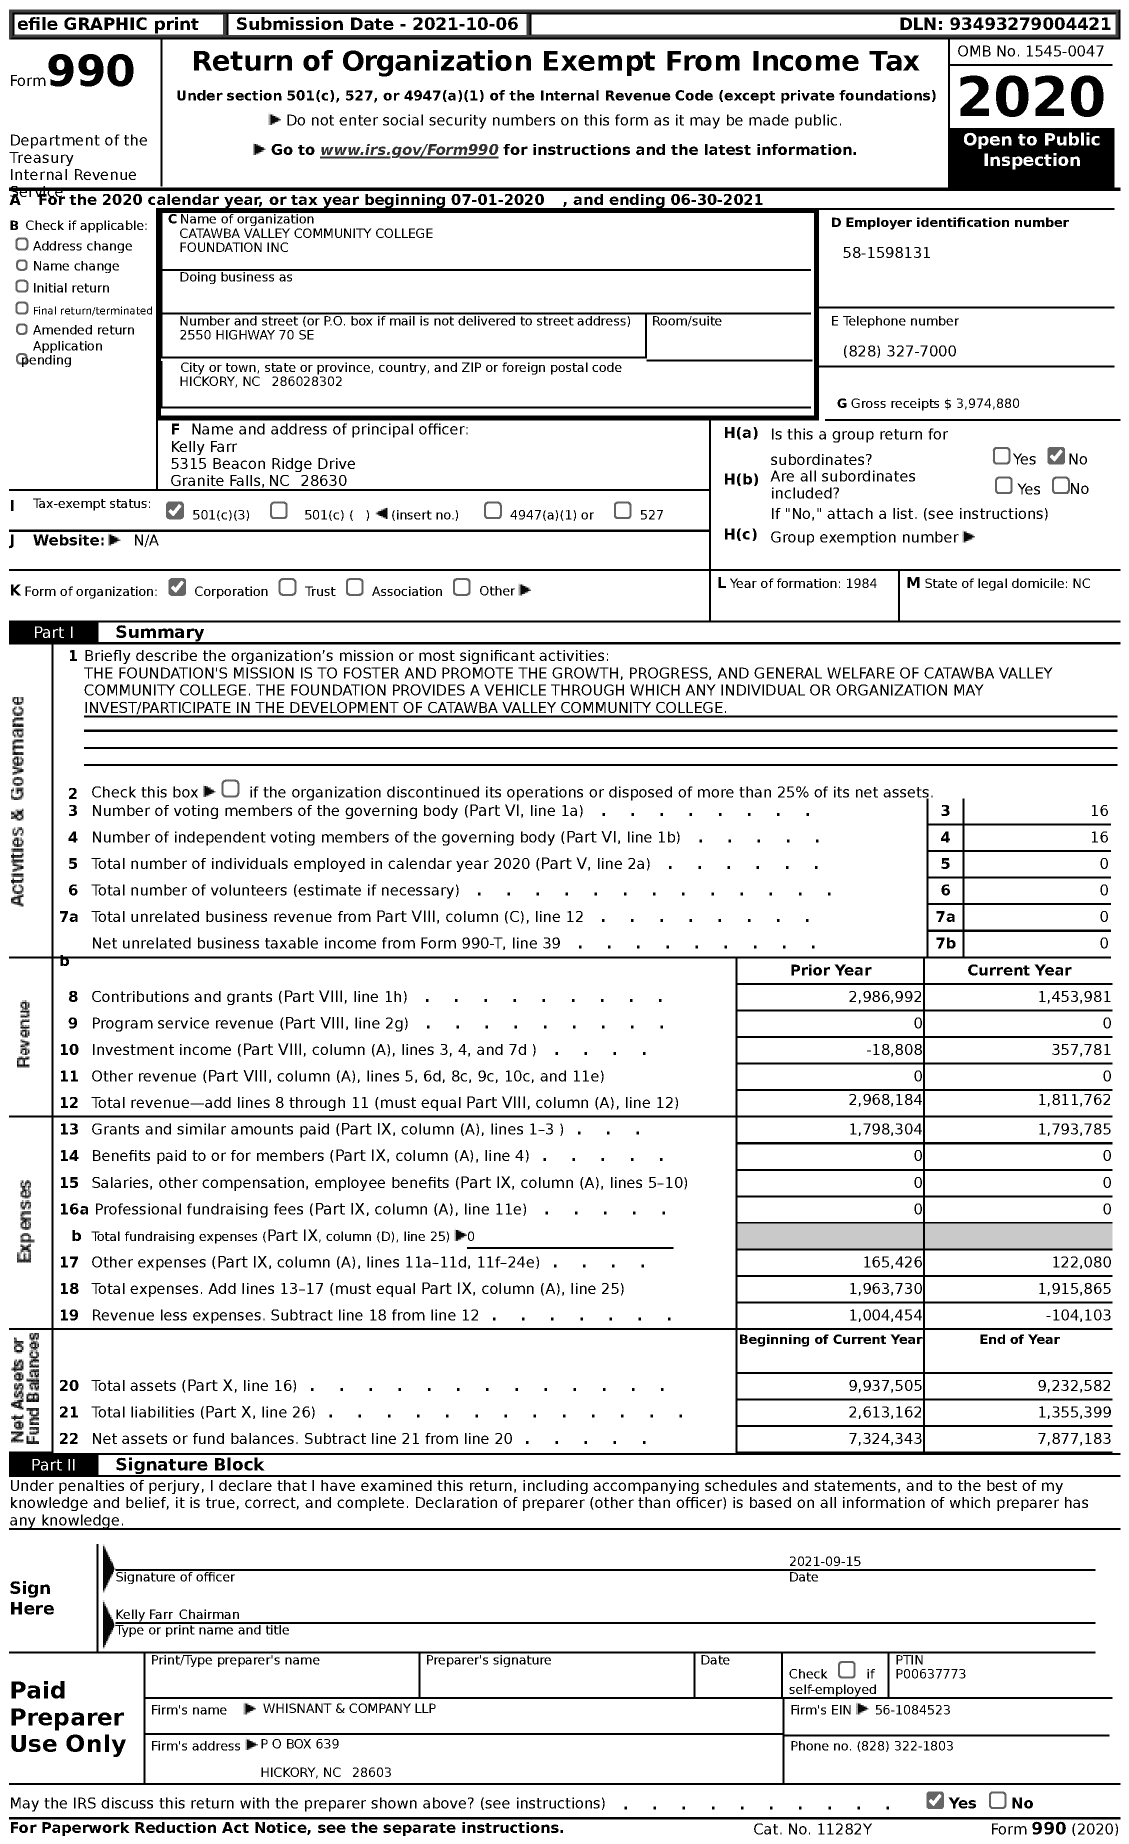 Image of first page of 2020 Form 990 for Catawba Valley Community College Foundation